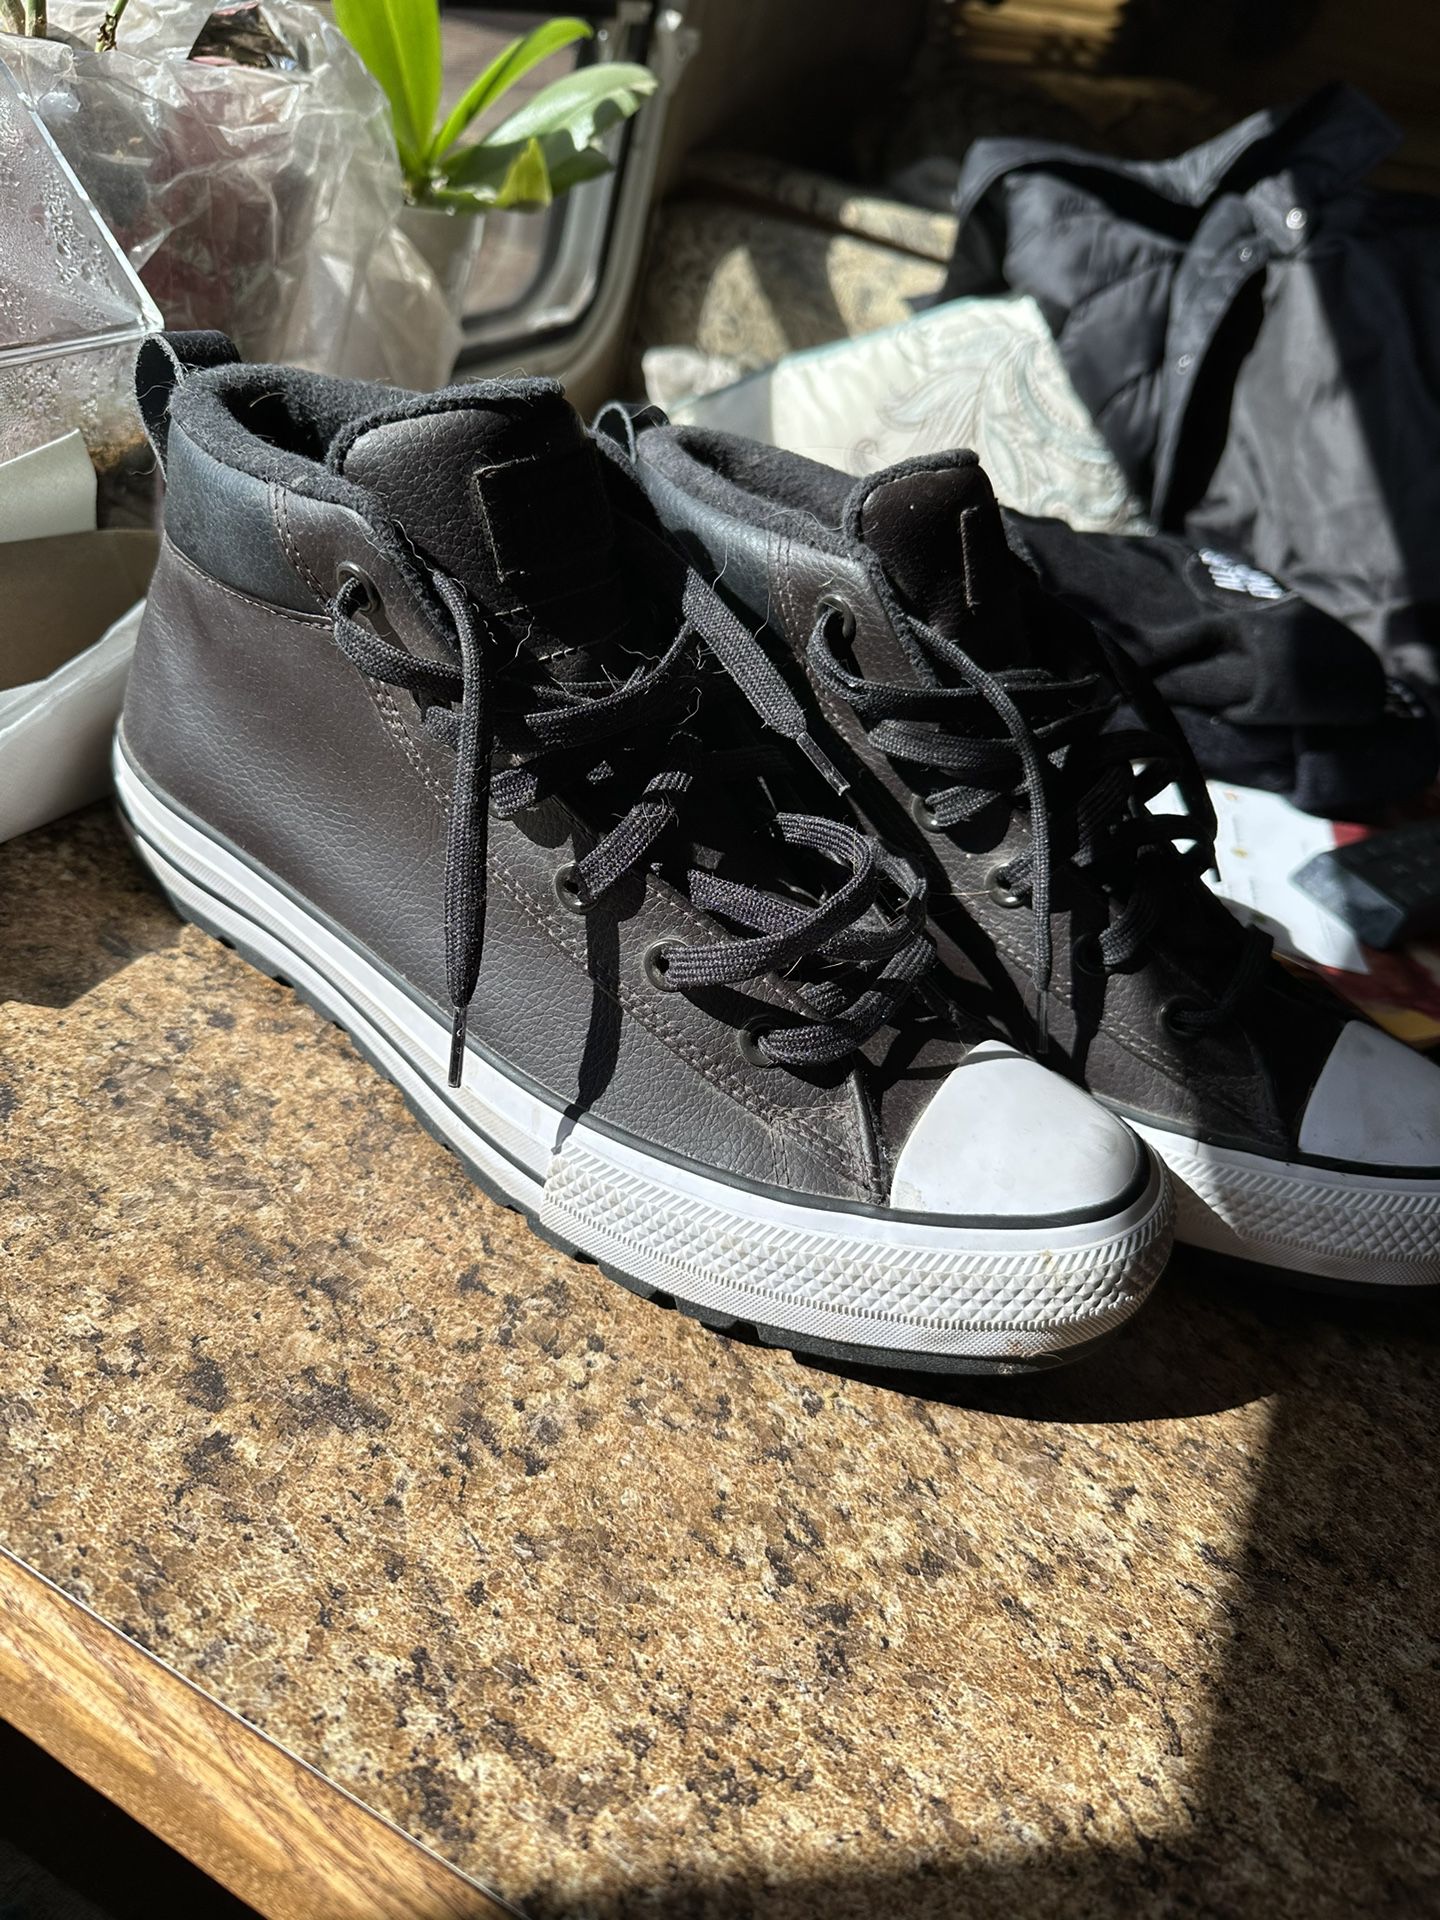 Mens Converse Size 11 for Sale in Albuquerque, NM - OfferUp